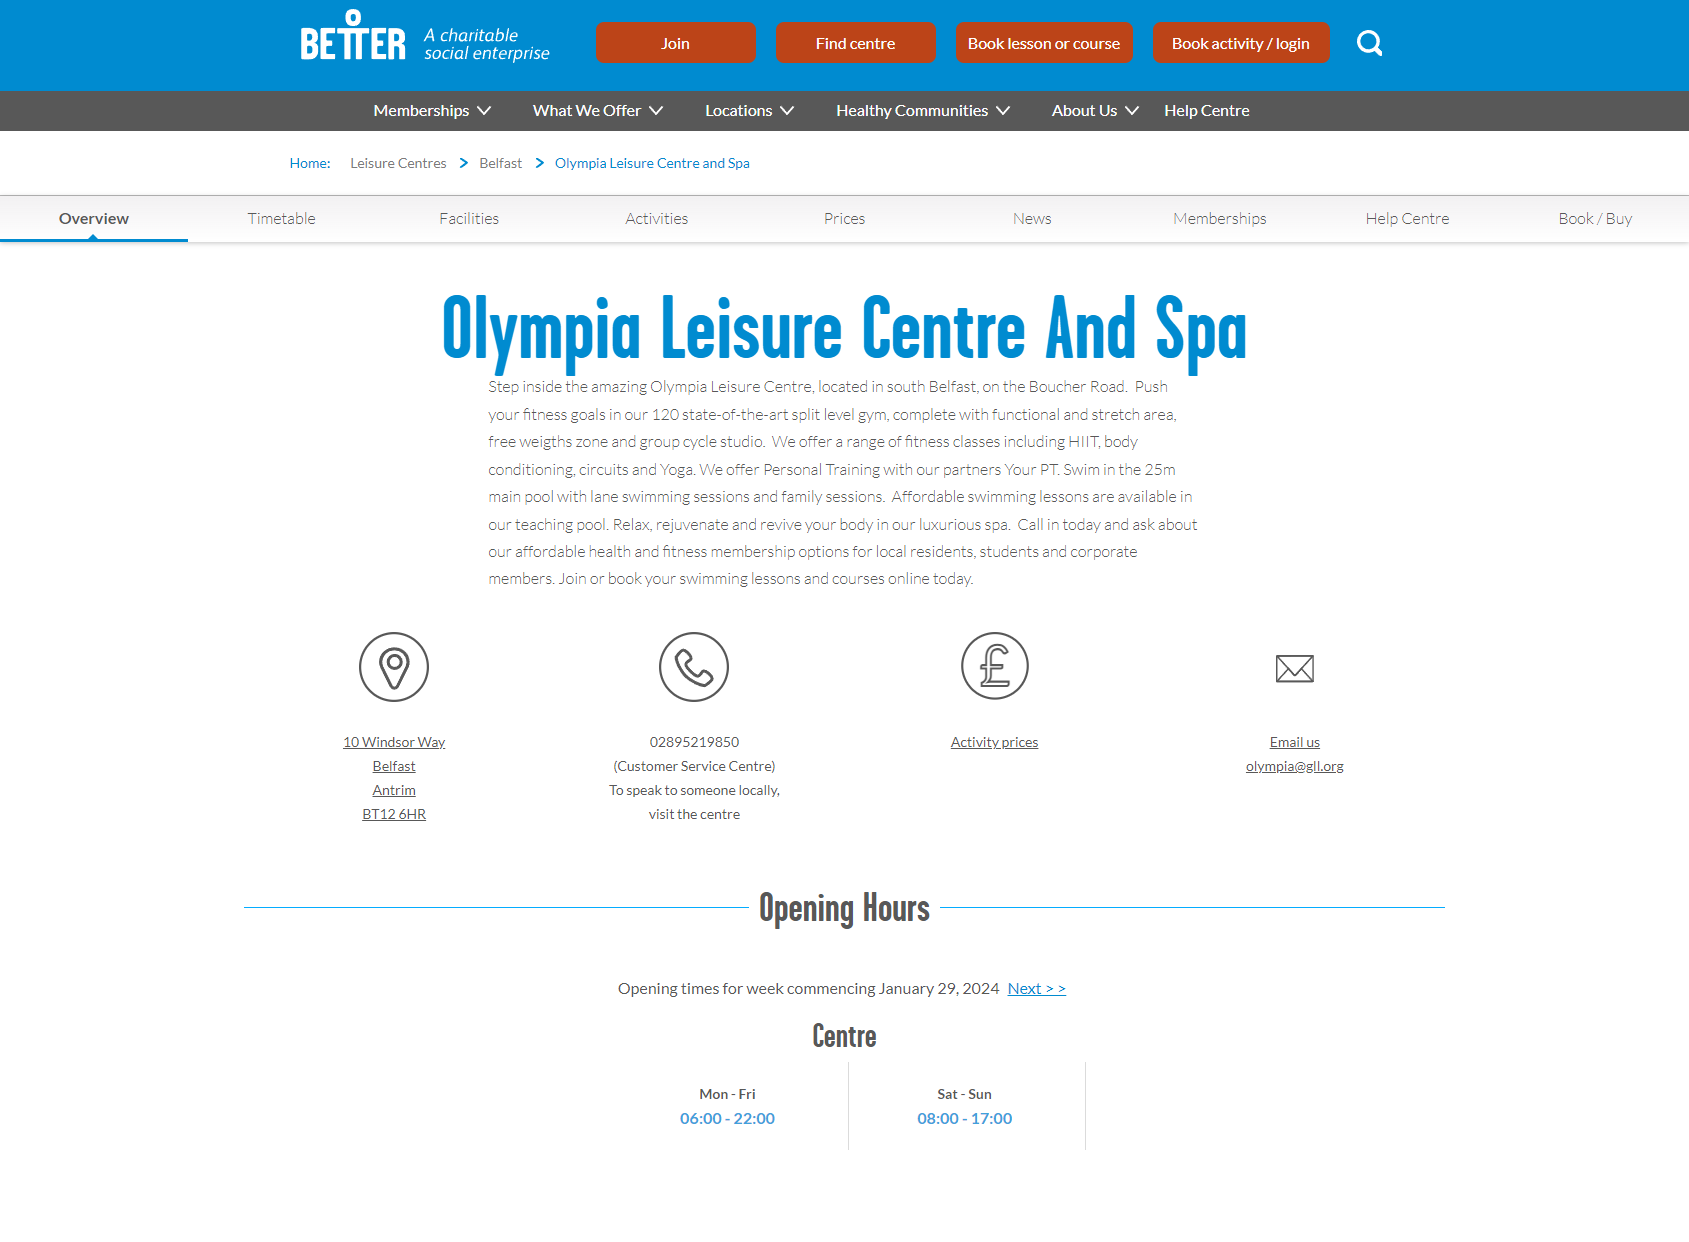 Olympia Leisure Centre and Spa